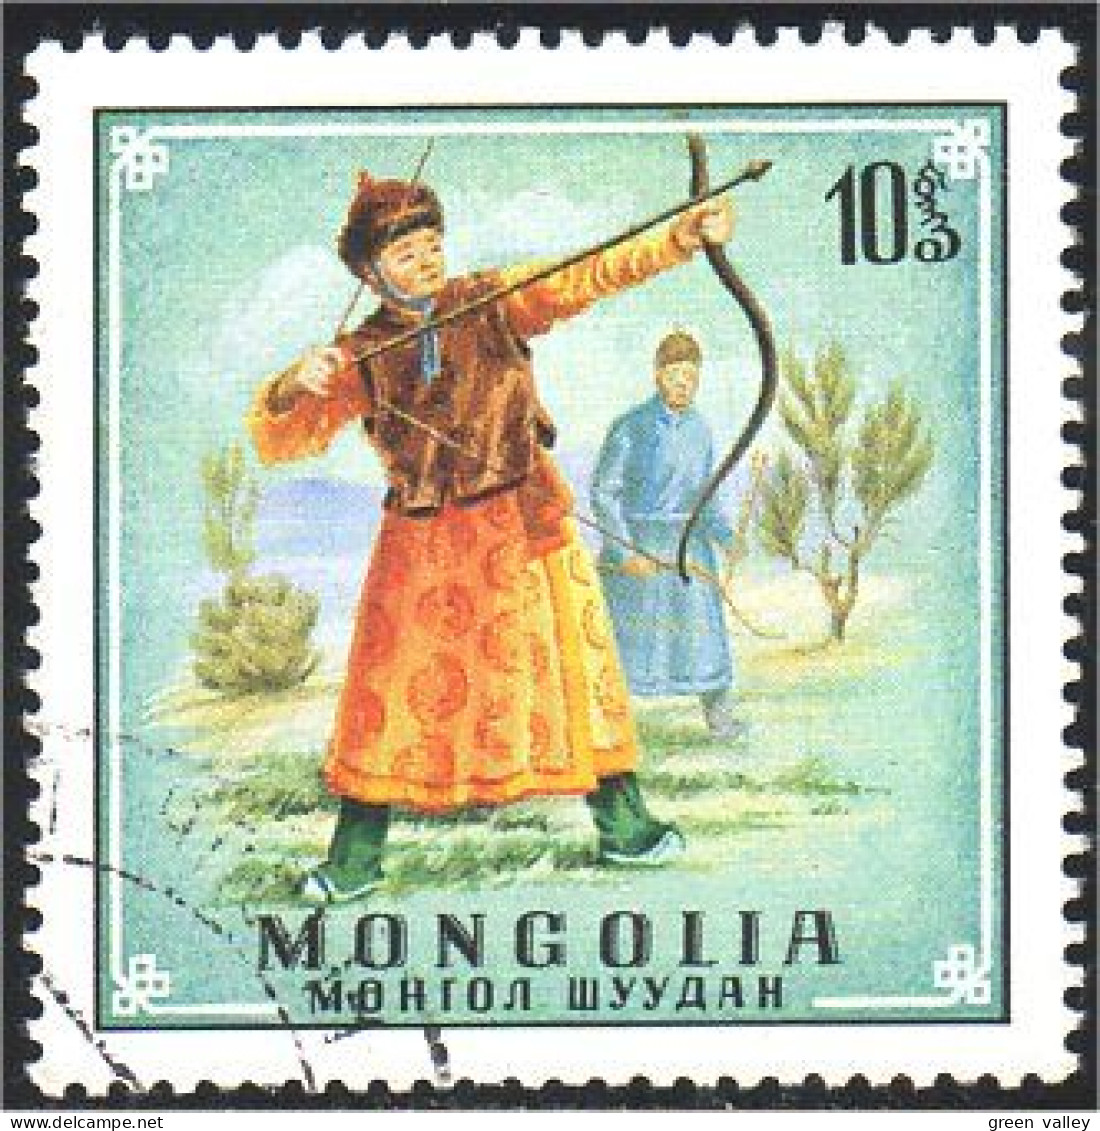 620 Mongolie Archer Traditionnel Traditional Archer (MNG-29) - Archery